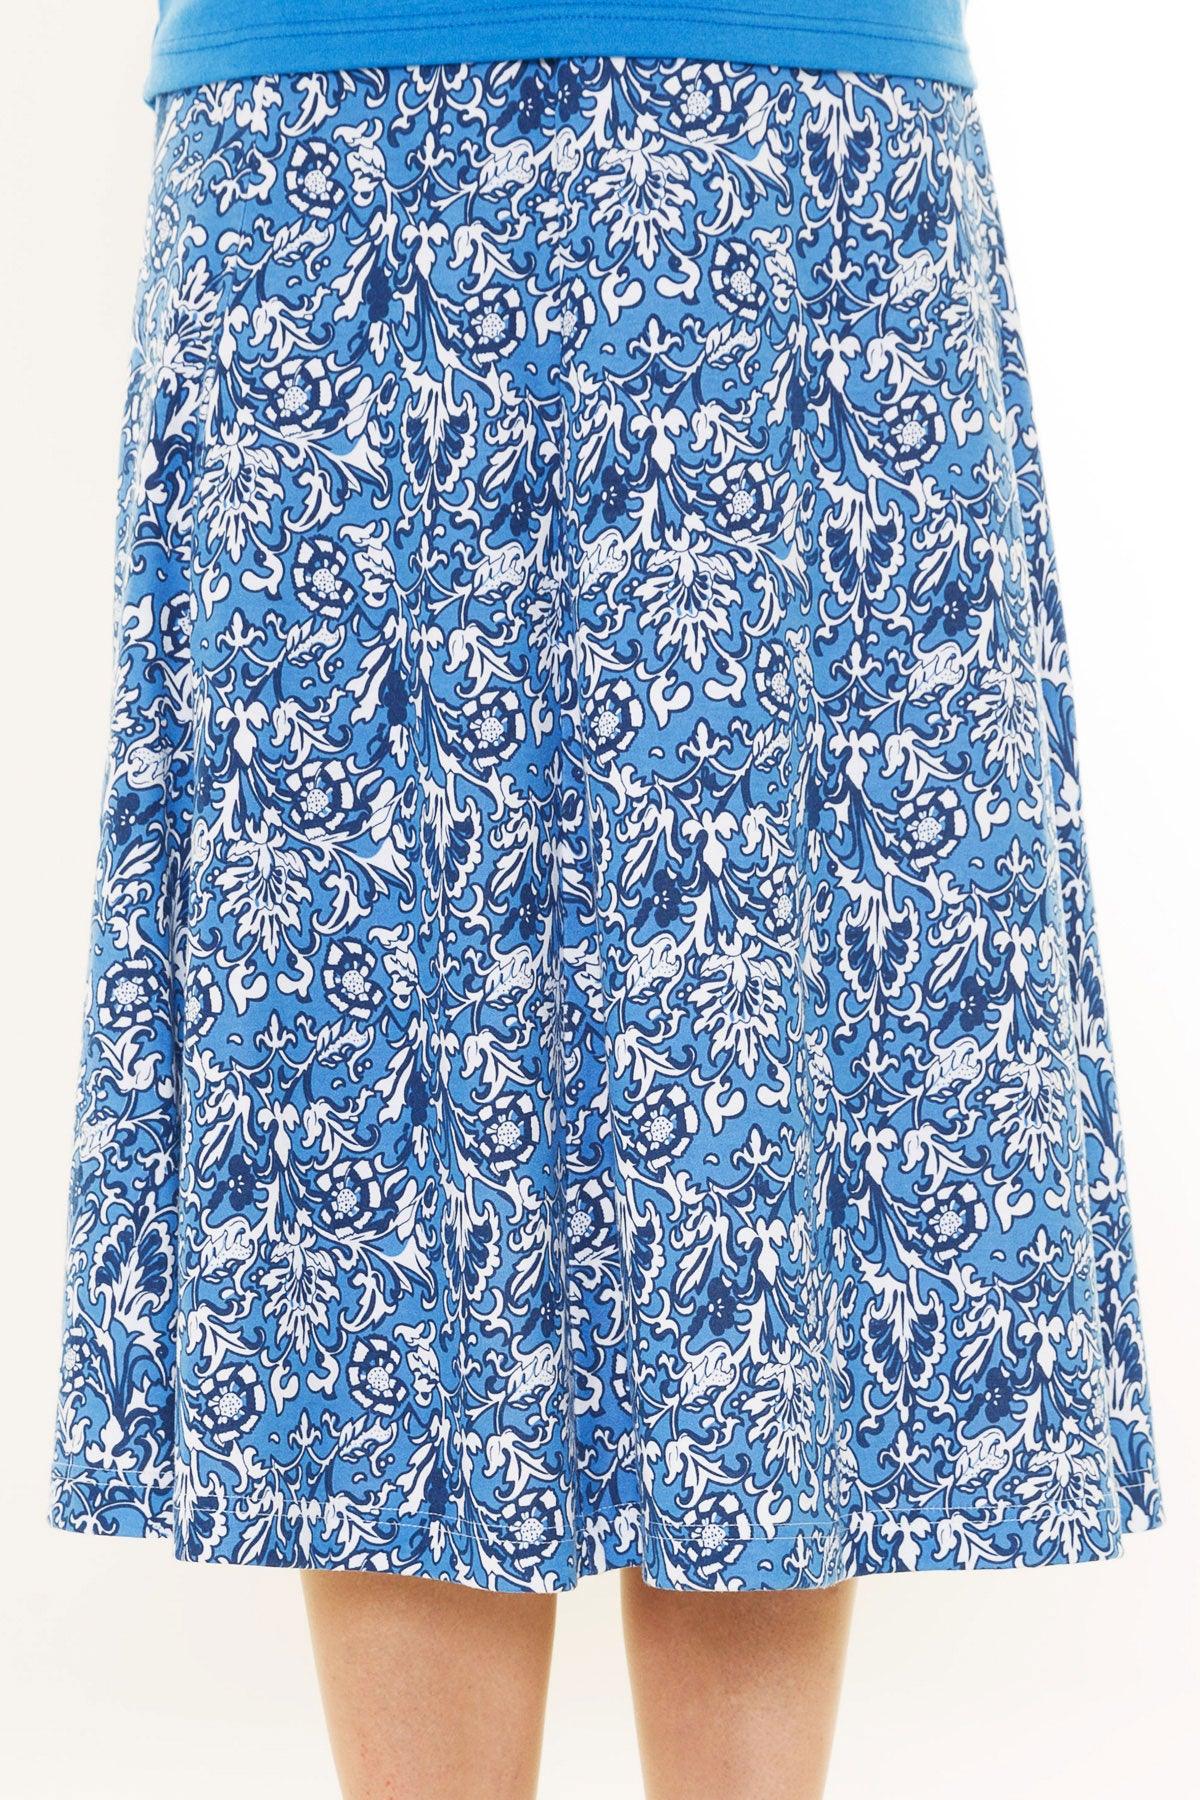 Betsy Thistle Skirt - Carr & Westley